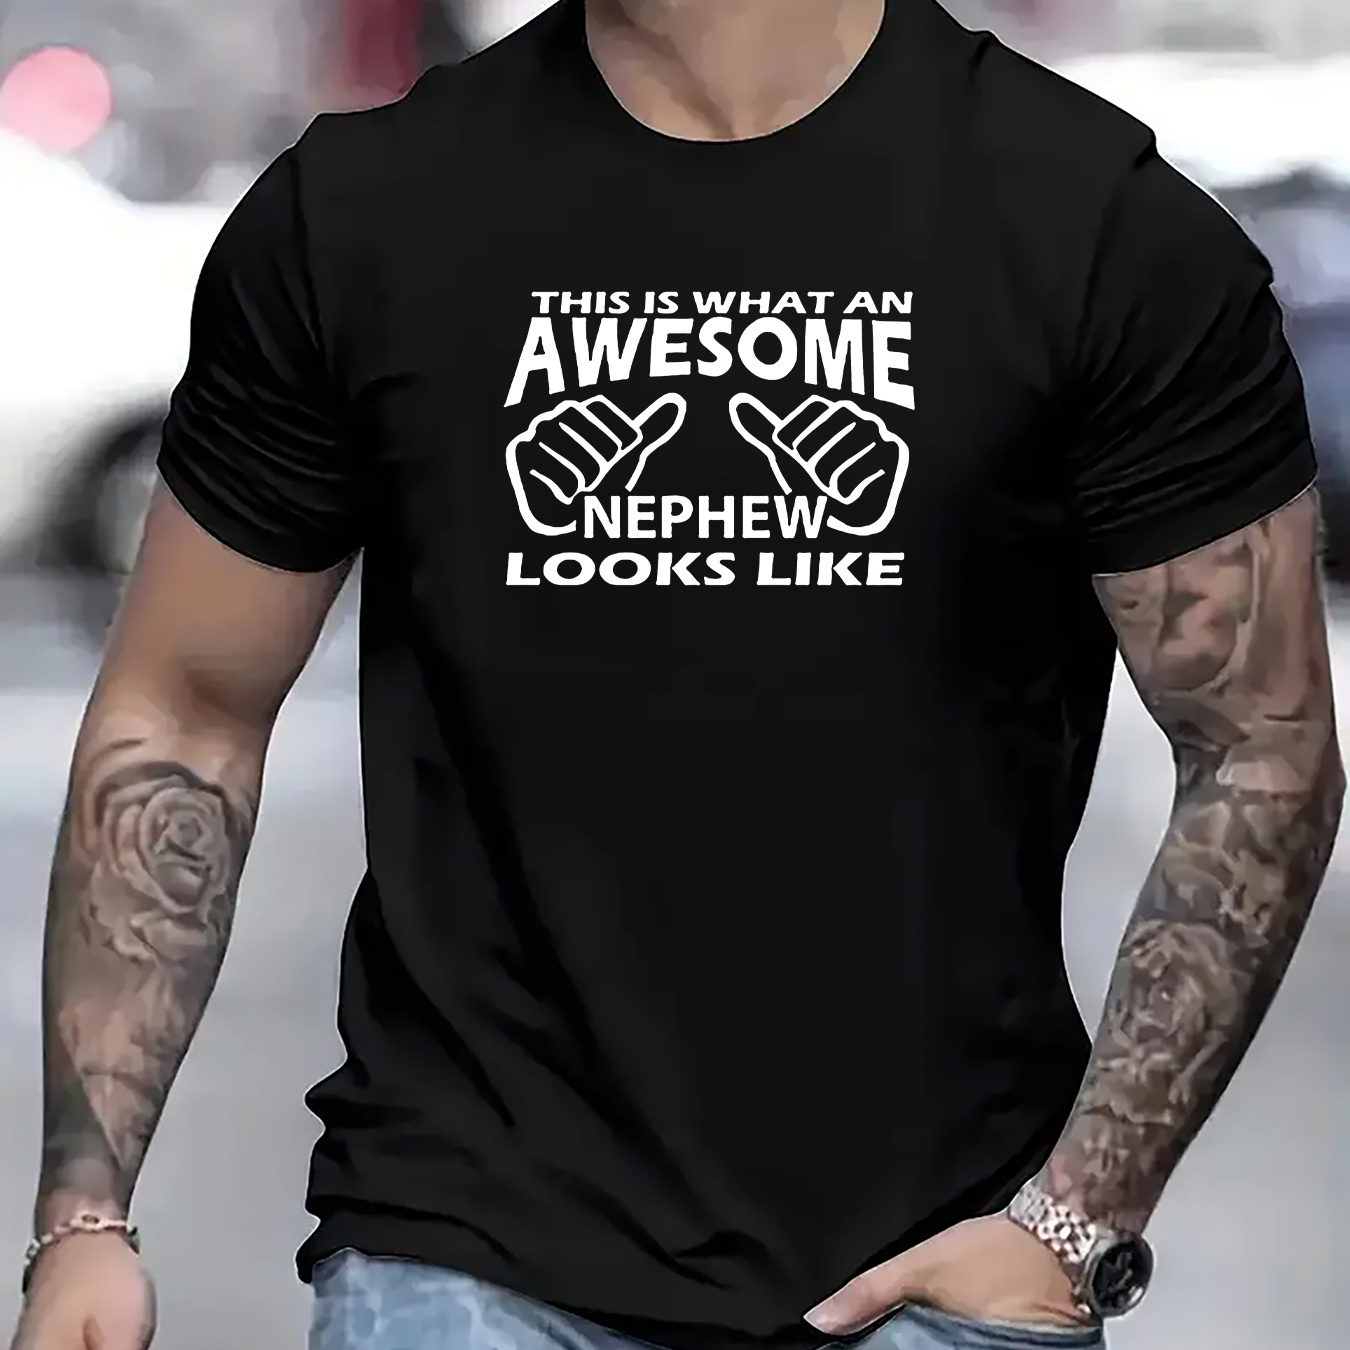 

An Awesome Nephew Print T Shirt, Tees For Men, Casual Short Sleeve T-shirt For Summer